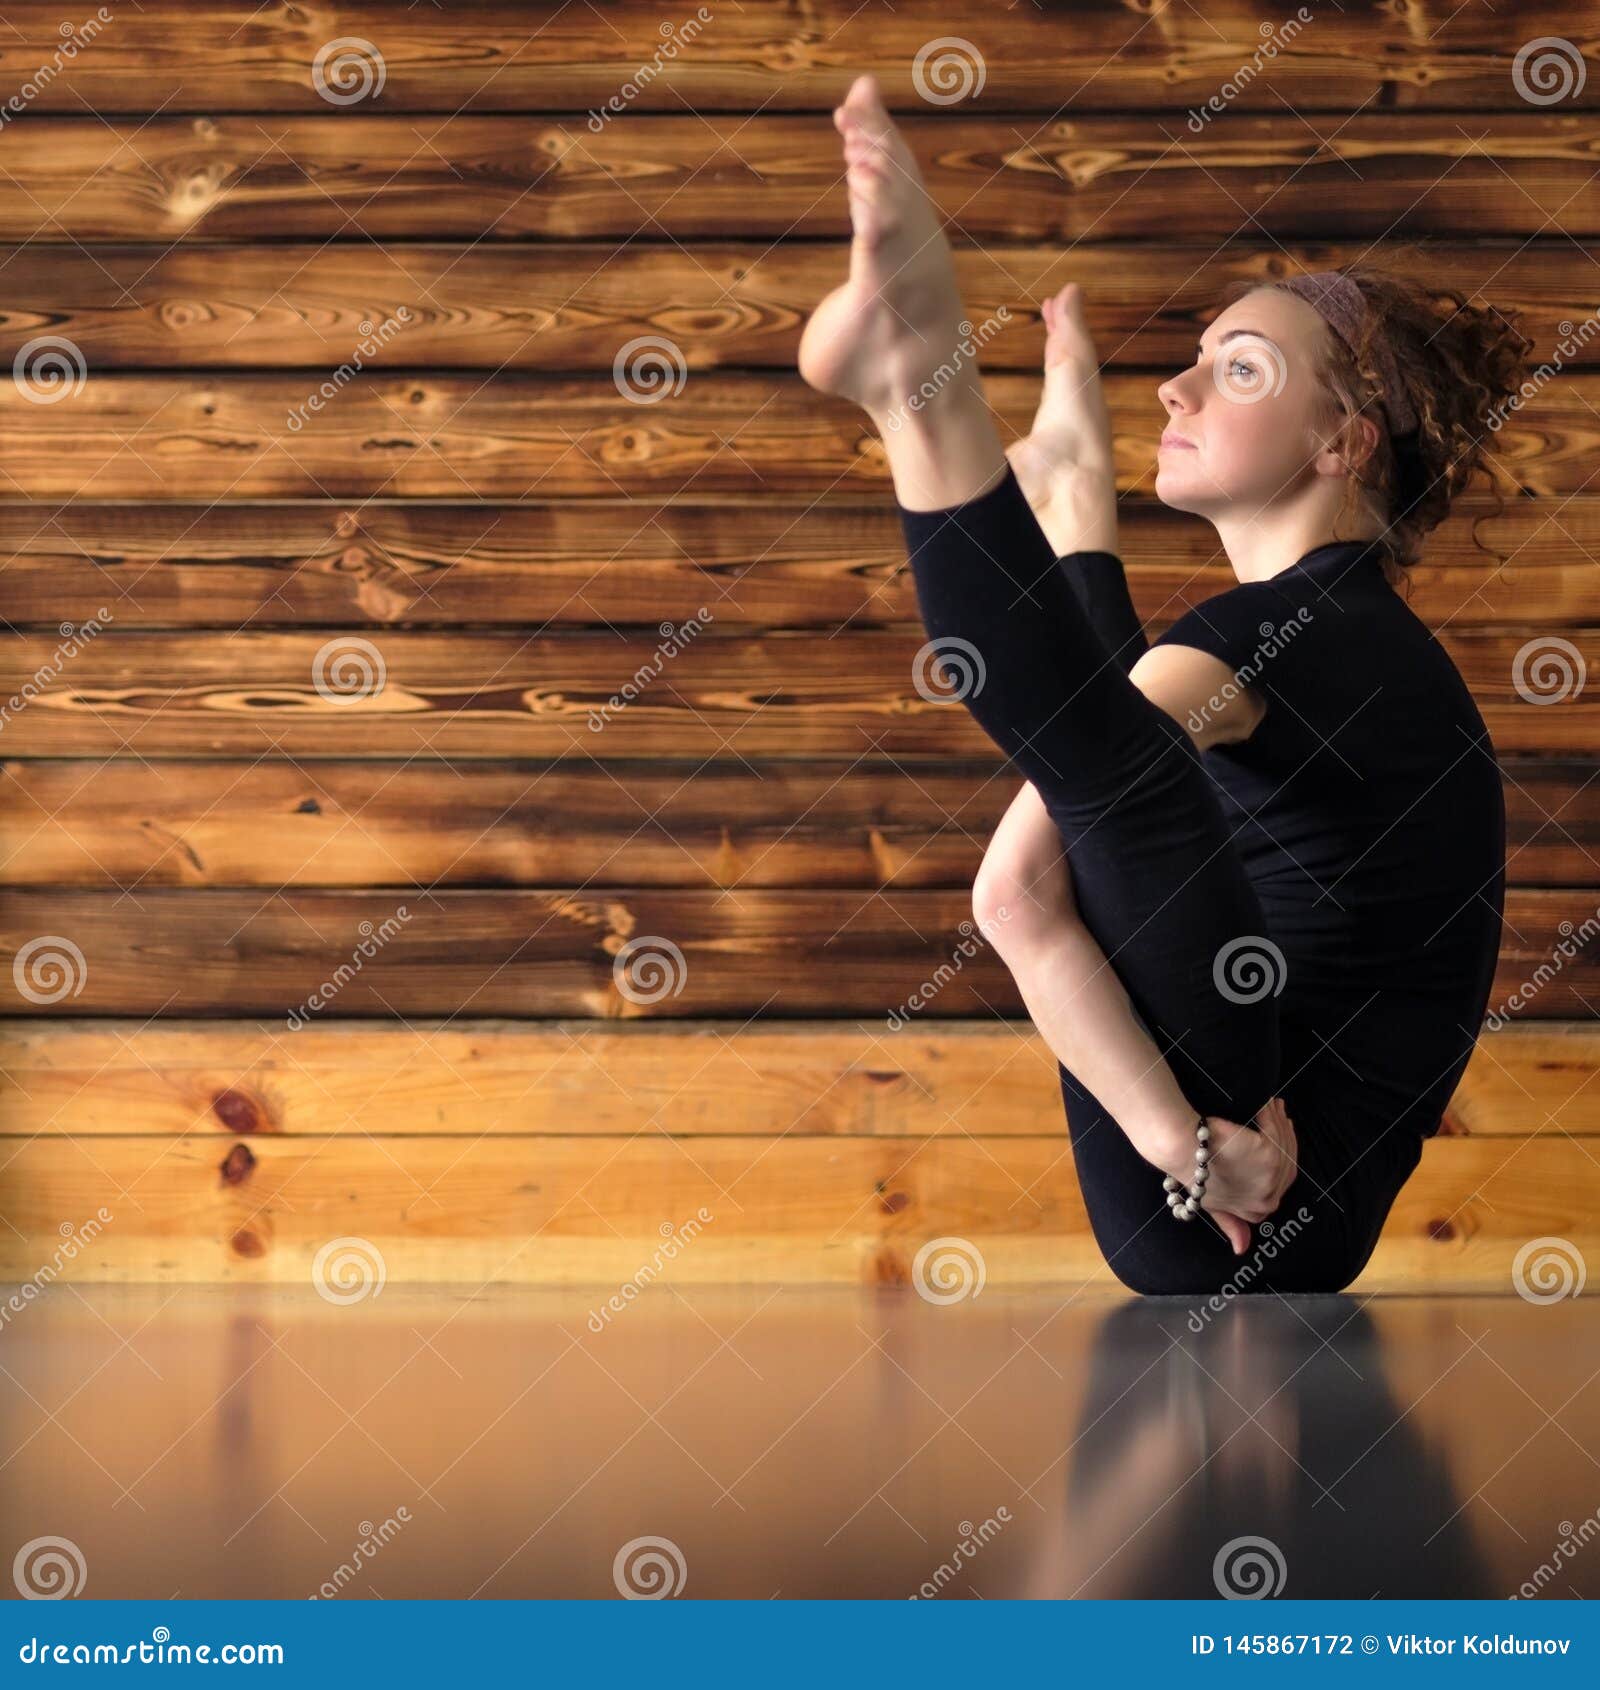 Boat pose variations for abs and balance woman Vector Image